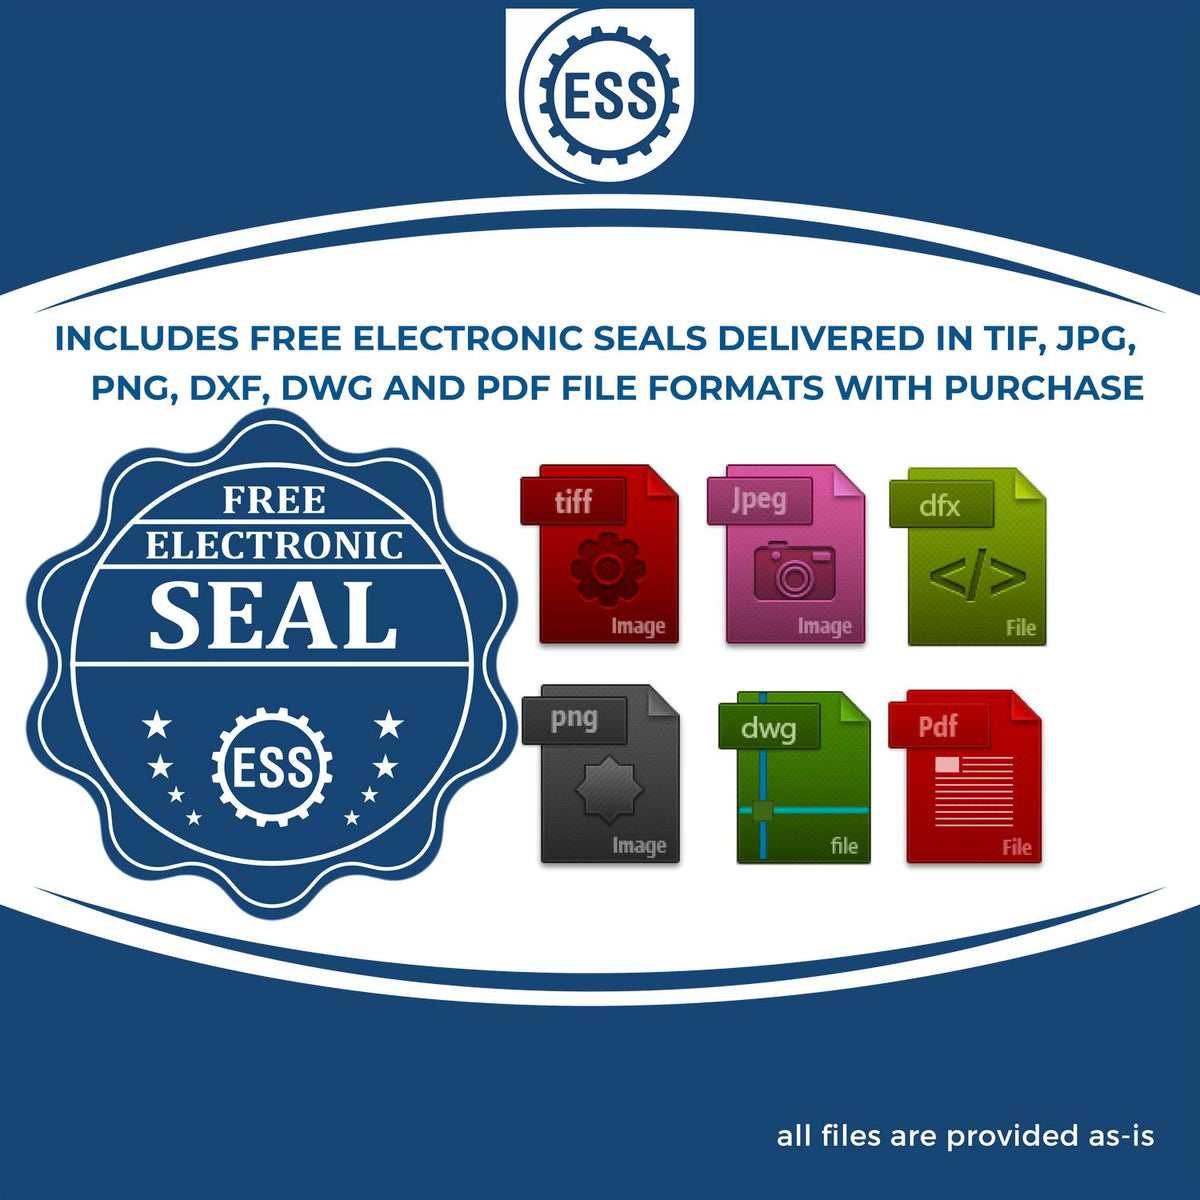 An infographic for the free electronic seal for the Handheld Montana Land Surveyor Seal illustrating the different file type icons such as DXF, DWG, TIF, JPG and PNG.